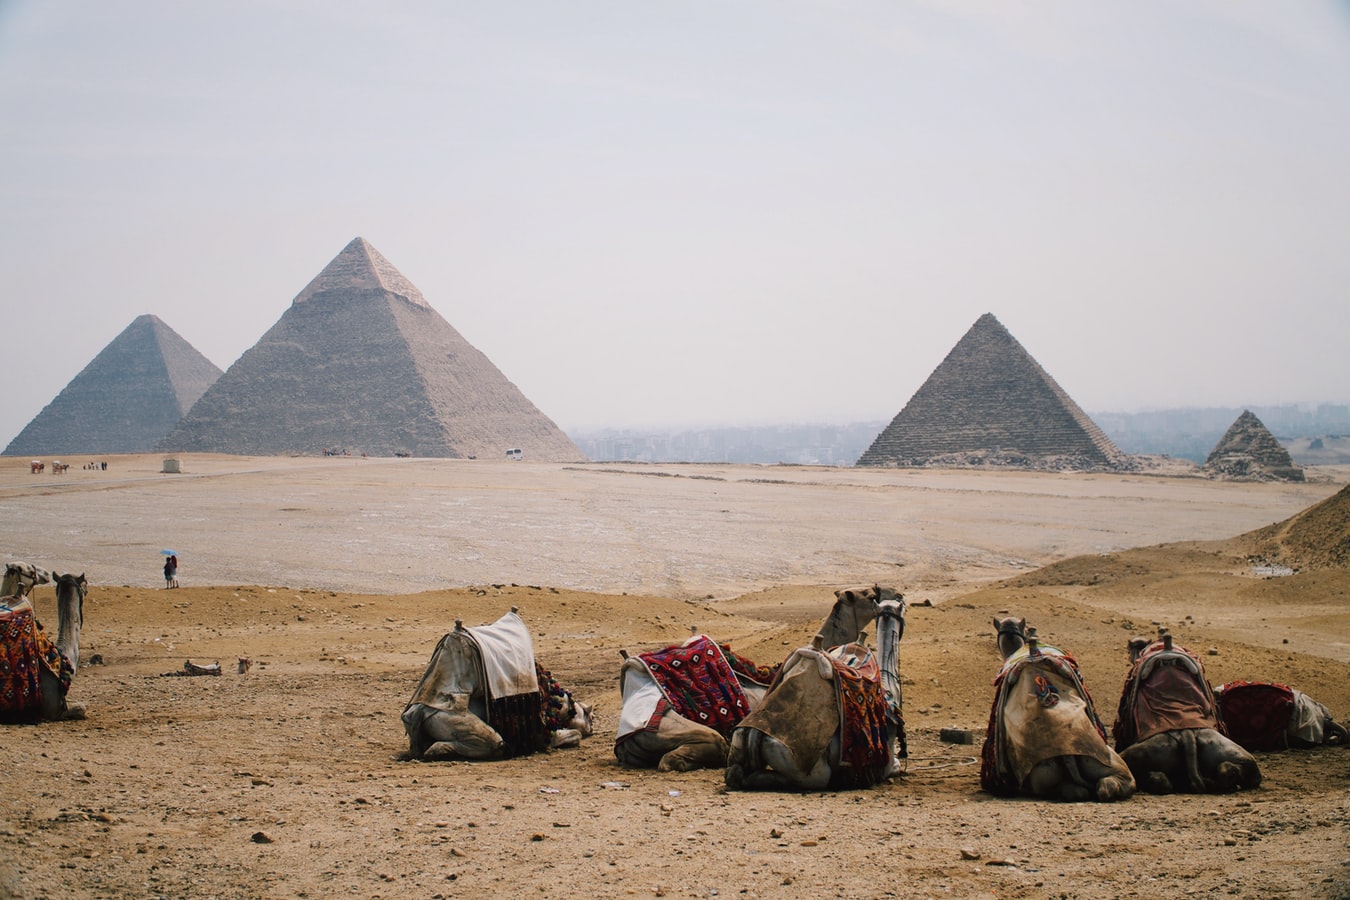 Cairo 4 day Private itinerary: Transfers, Pyramids excursion and city tour